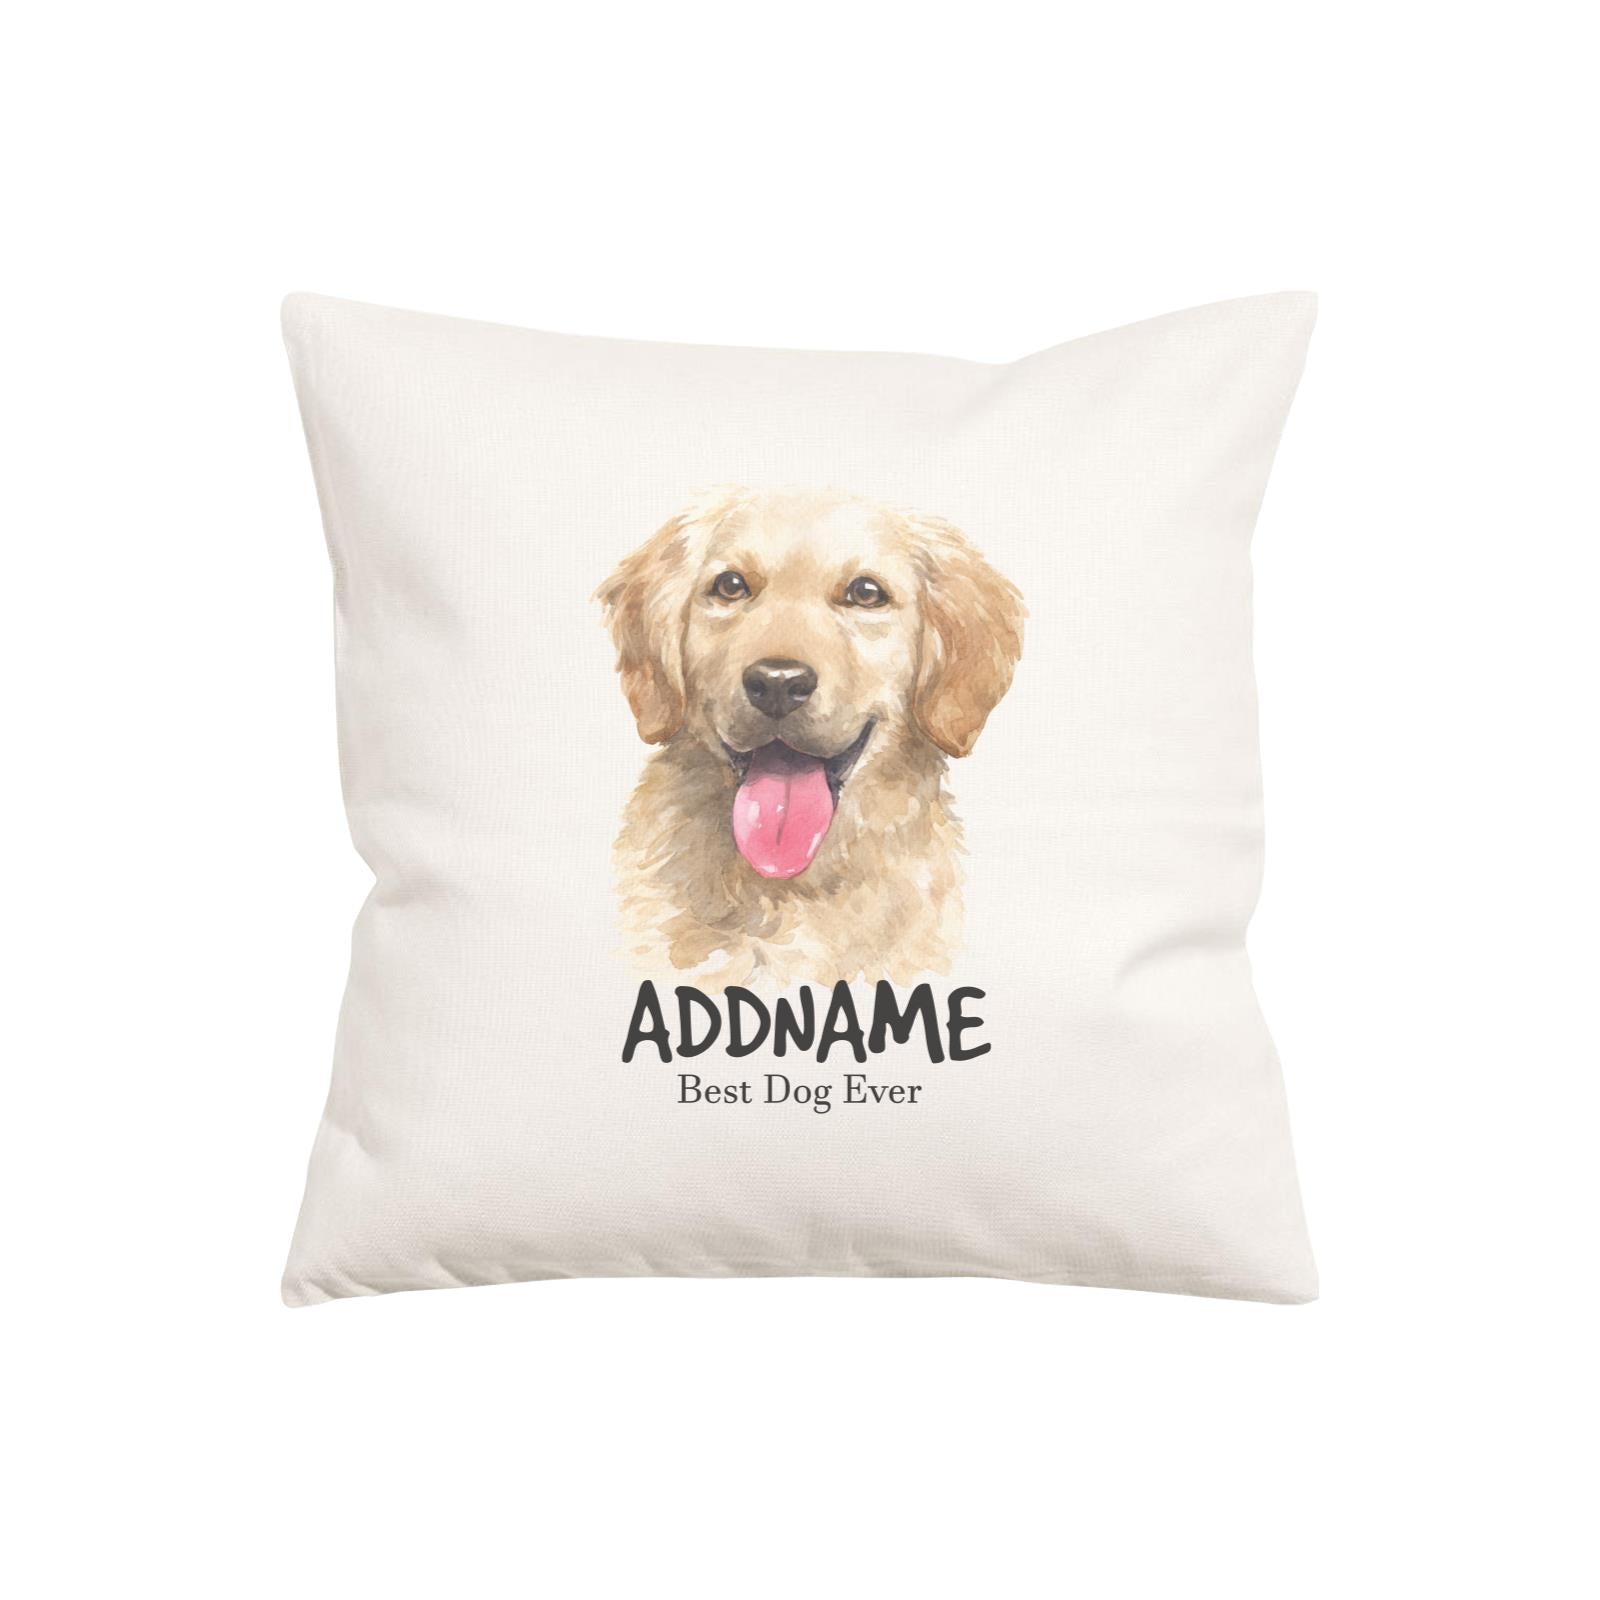 Watercolor Dog Series Golden Retriever Smile Best Dog Ever Addname Pillow Cushion